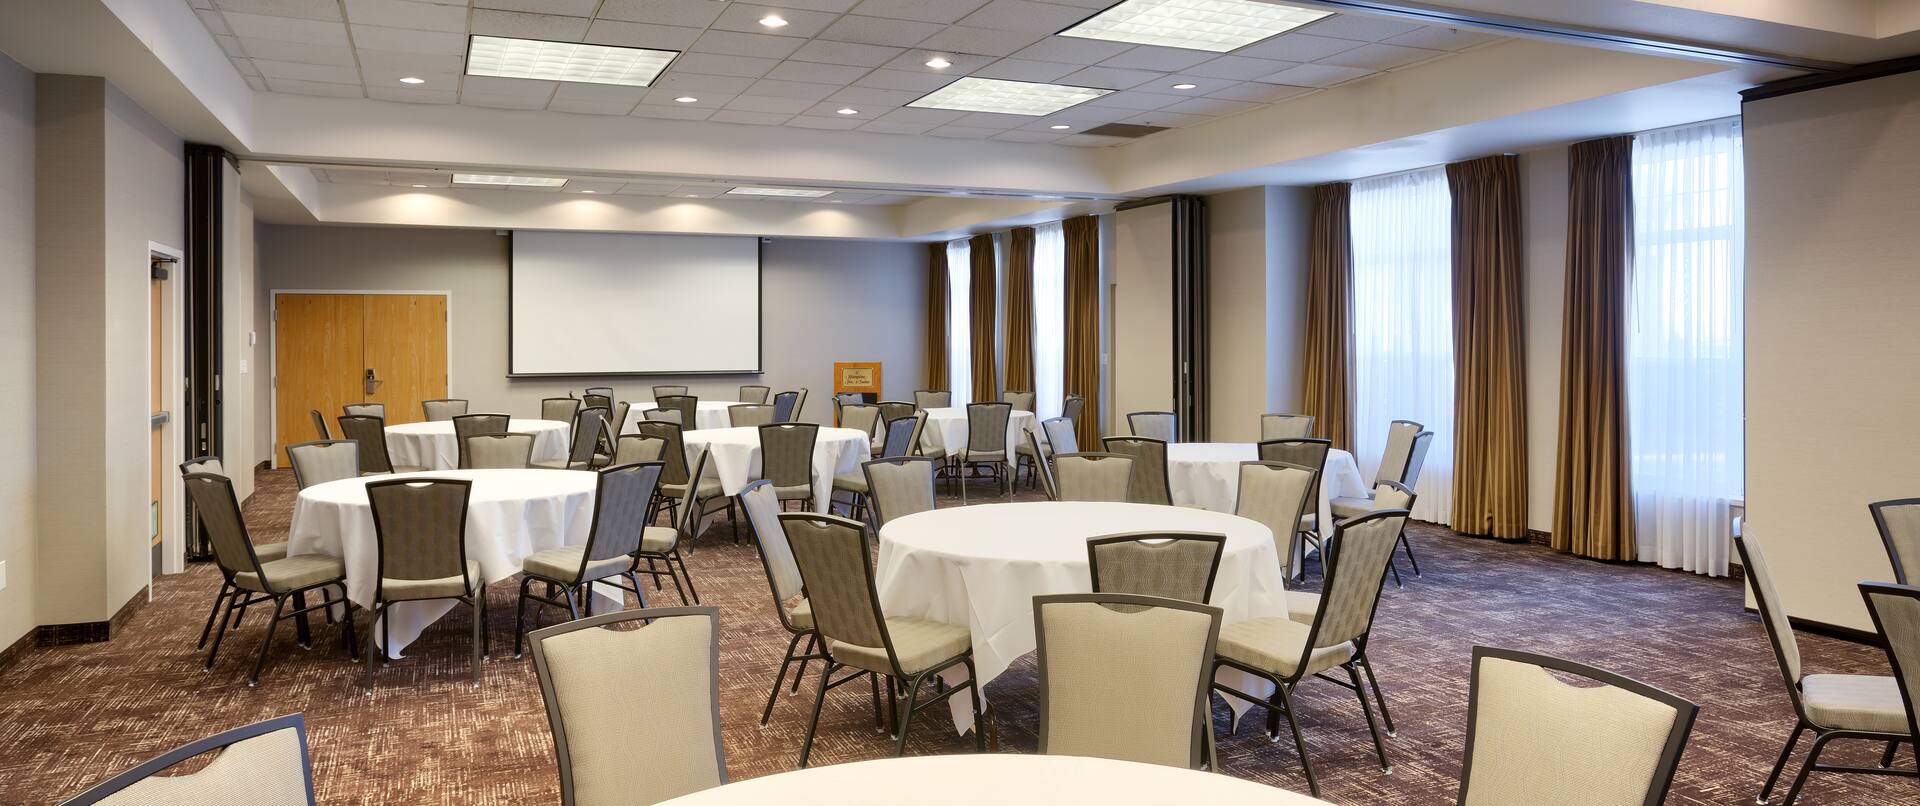 Meeting Room With Presentation Screen, Podium, Chairs and White Linens on Banquet Tables 